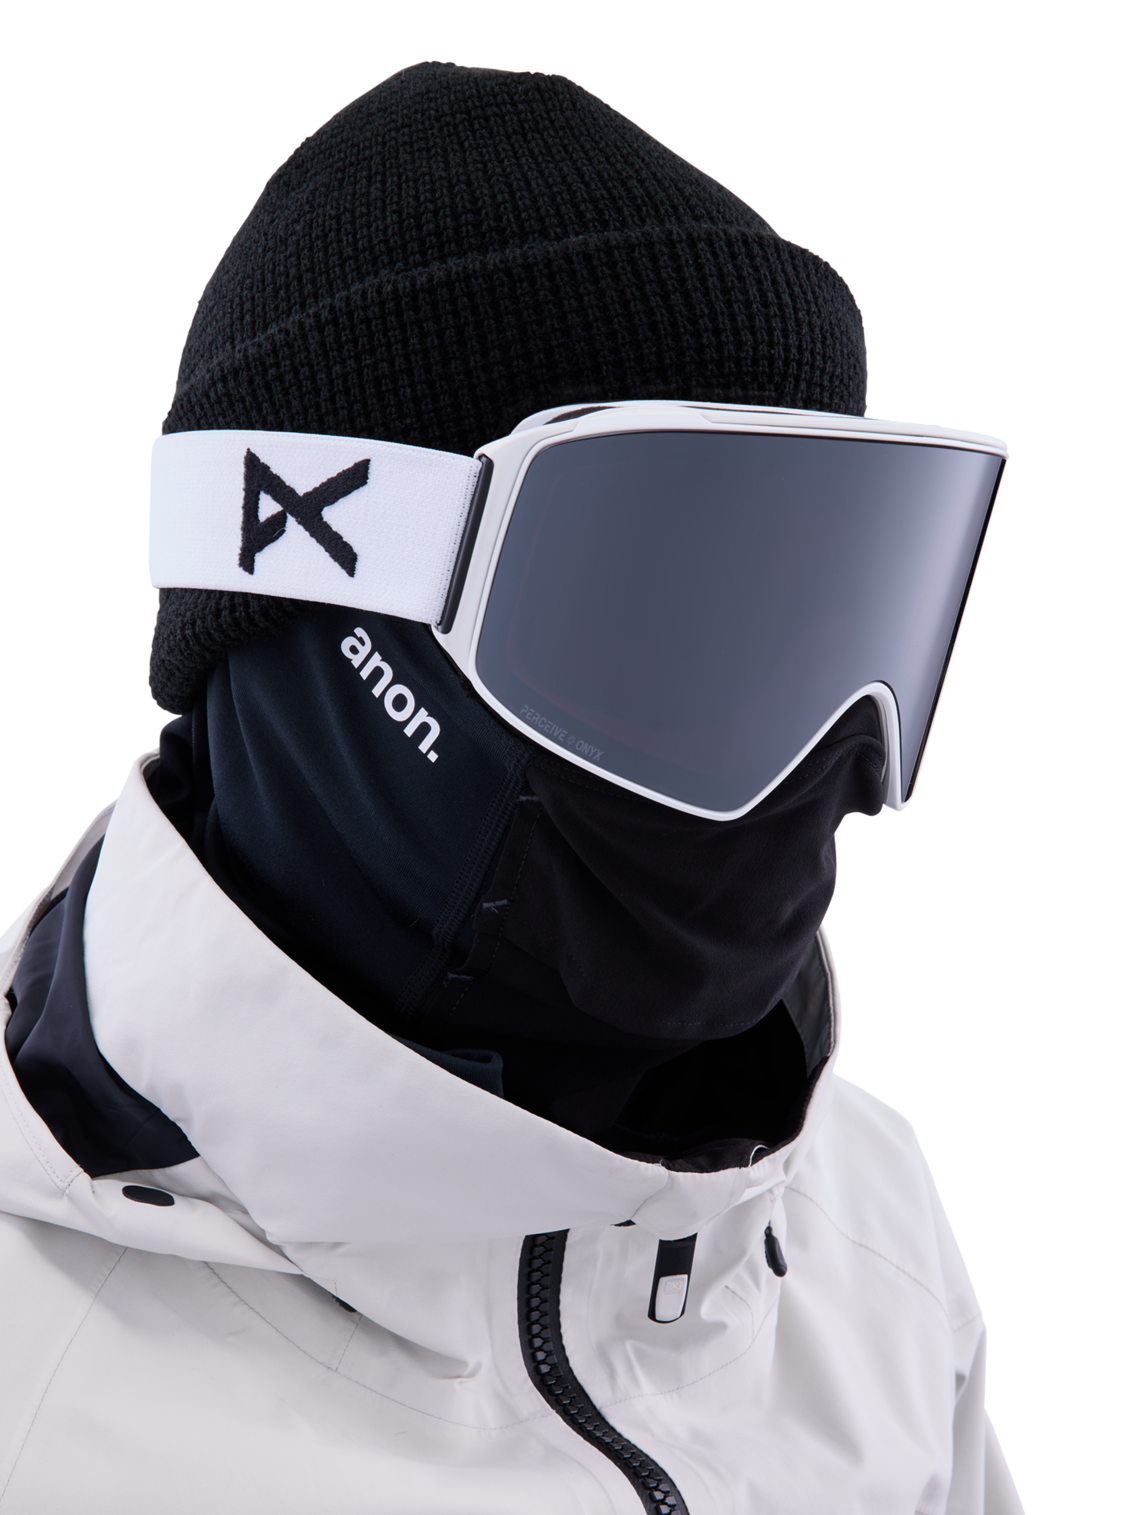 Anon M4 goggle Cylindrical white / perceive sunny onyx (including extra lens and MFI mask)